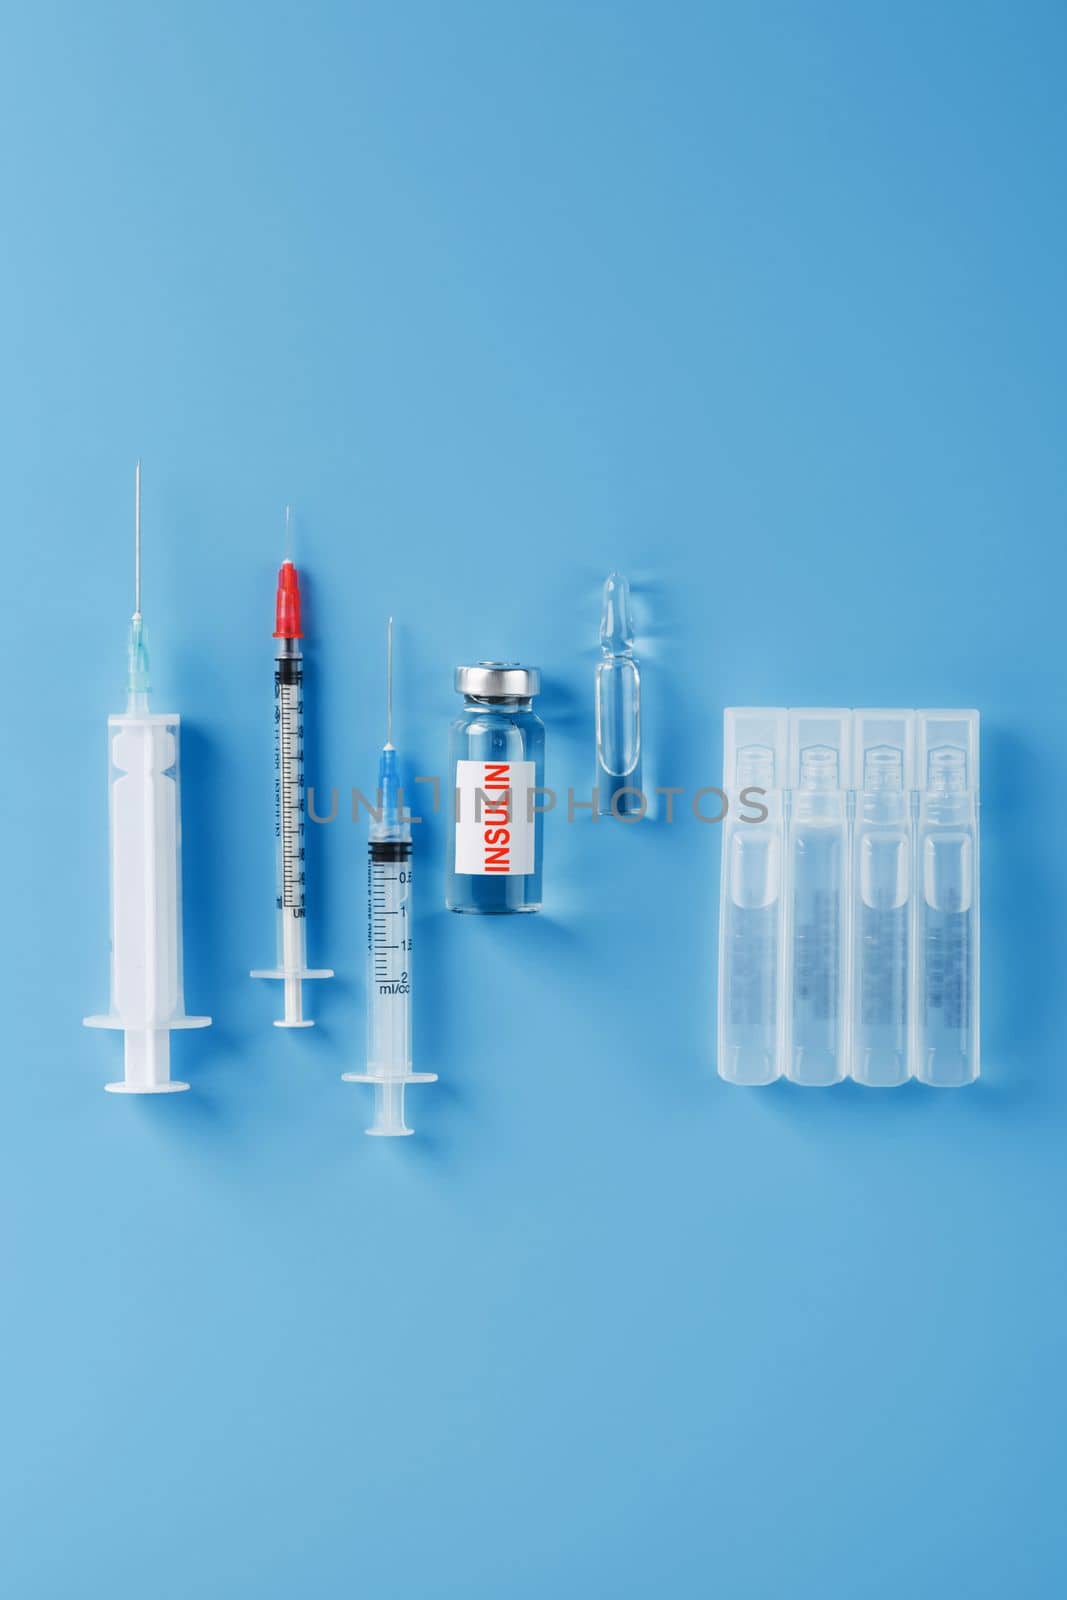 Ampoule bottle with insulin, needles and syringes for medical subcutaneous injection on a blue background